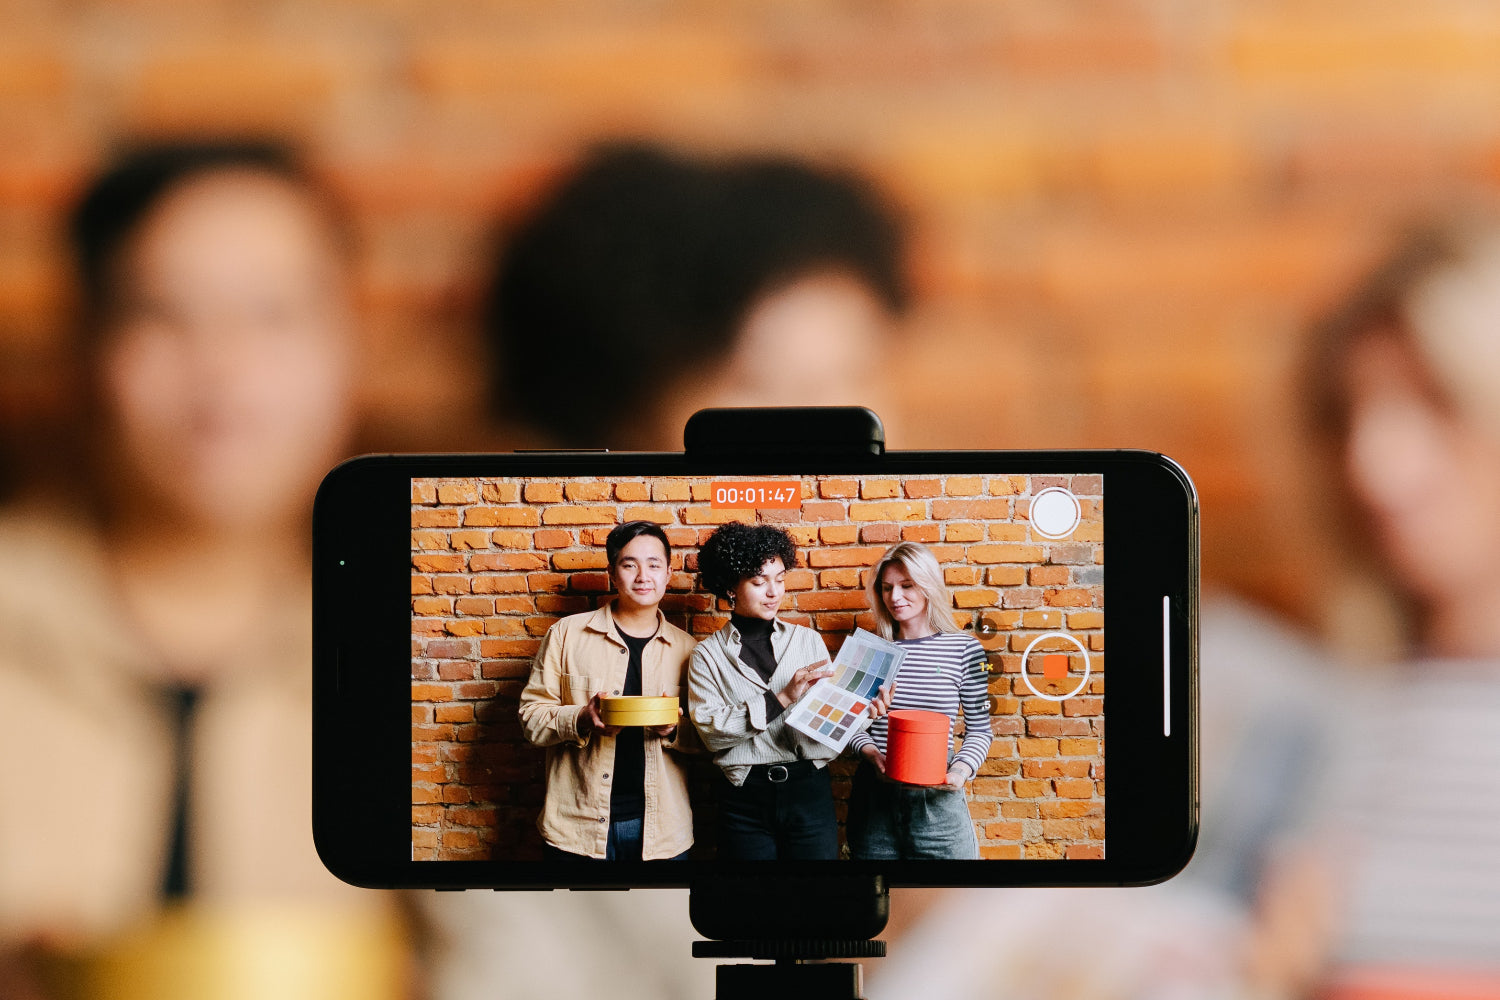 A phone captures a video of three people hanging out by a brick wall